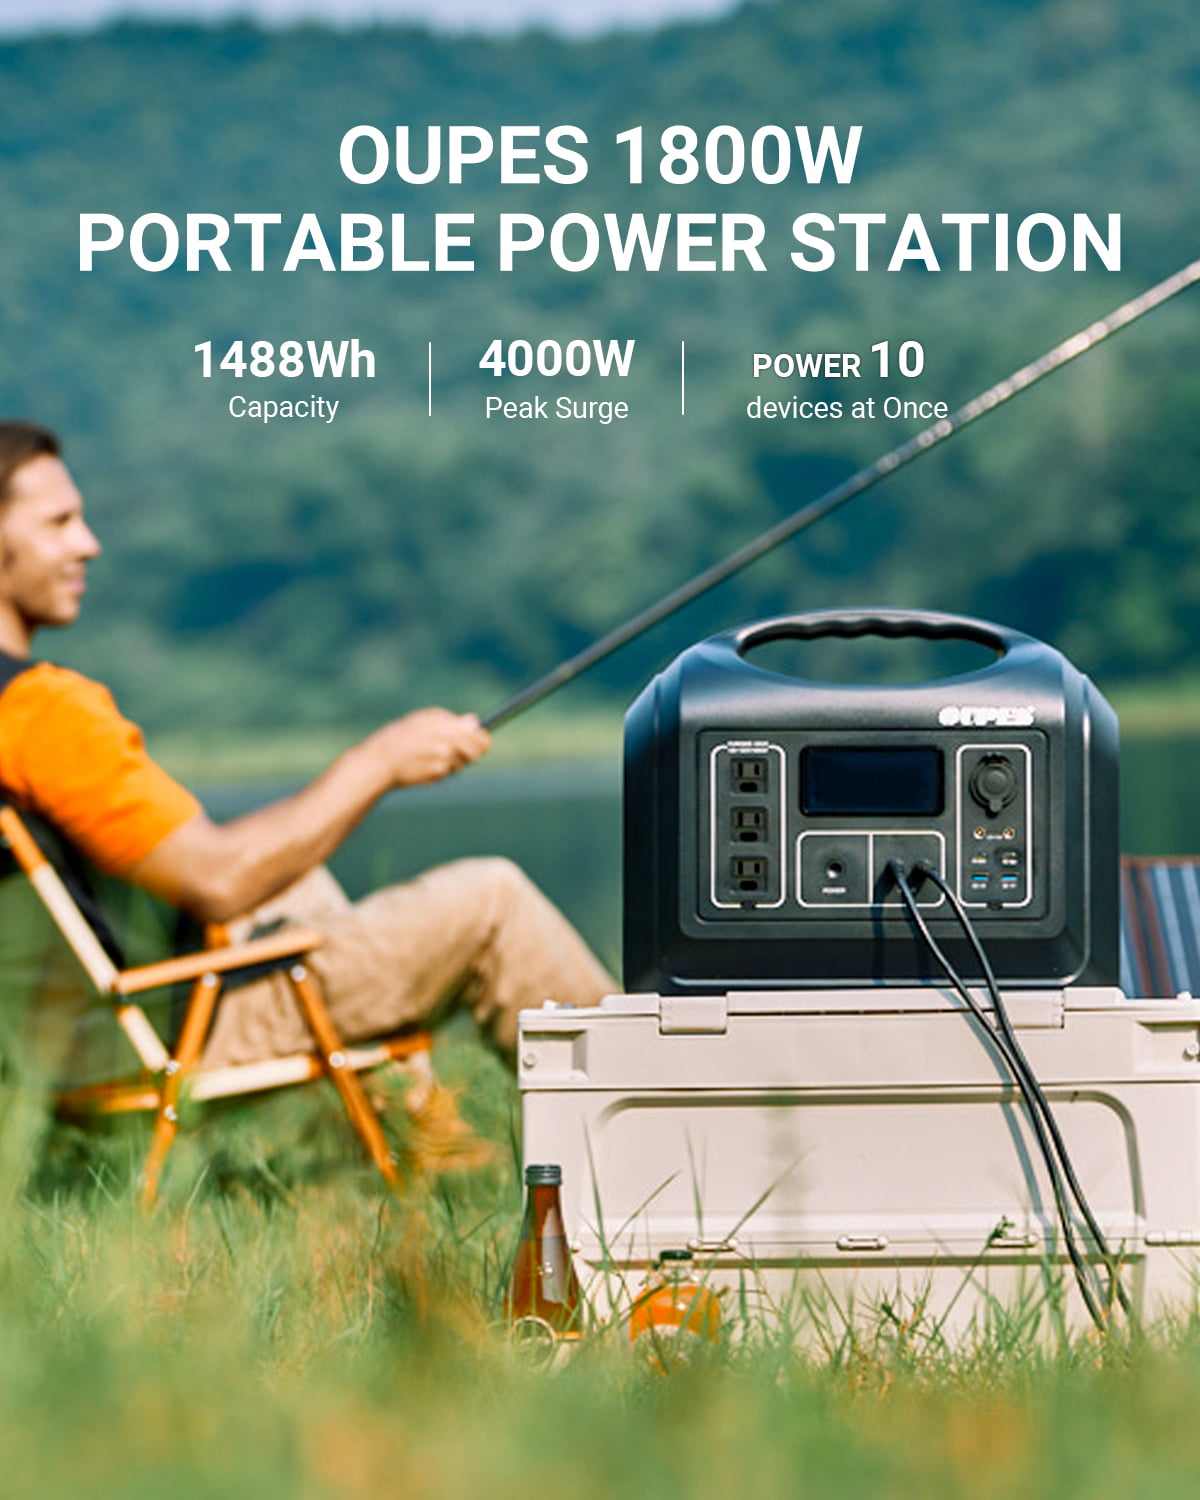 OUPES 1800W Portable Power Station, Solar Generator 1488Wh (465000 mAh) LiFePO4  Battery Backup with 3 AC Outlets (4000W Peak), 4000+ Cycle for Home Use,  Camping | Akkus und PowerBanks